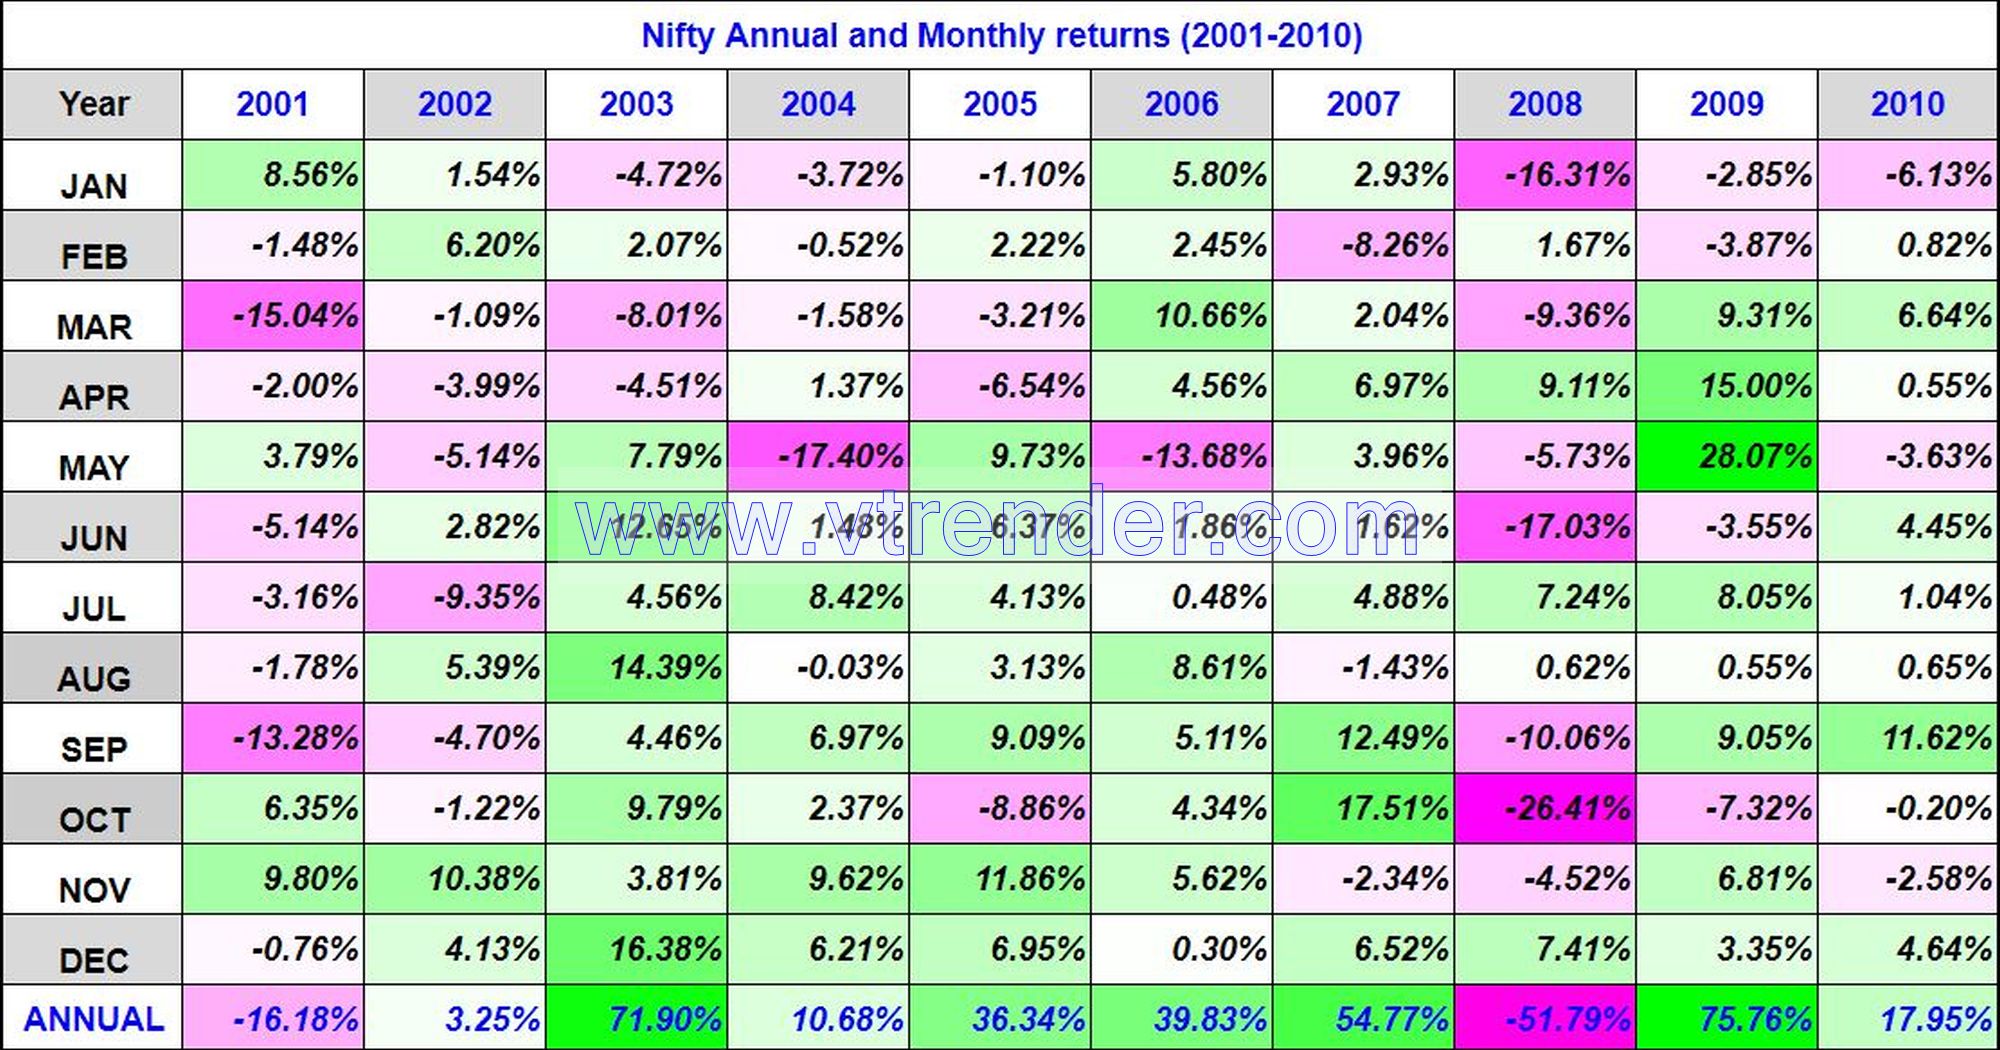 Niftyreturns2001 2010 Nifty 50 Monthly And Annual Returns (1991-2023) Updated 31St Mar 2023 Annual, Monthly, Nifty Returns